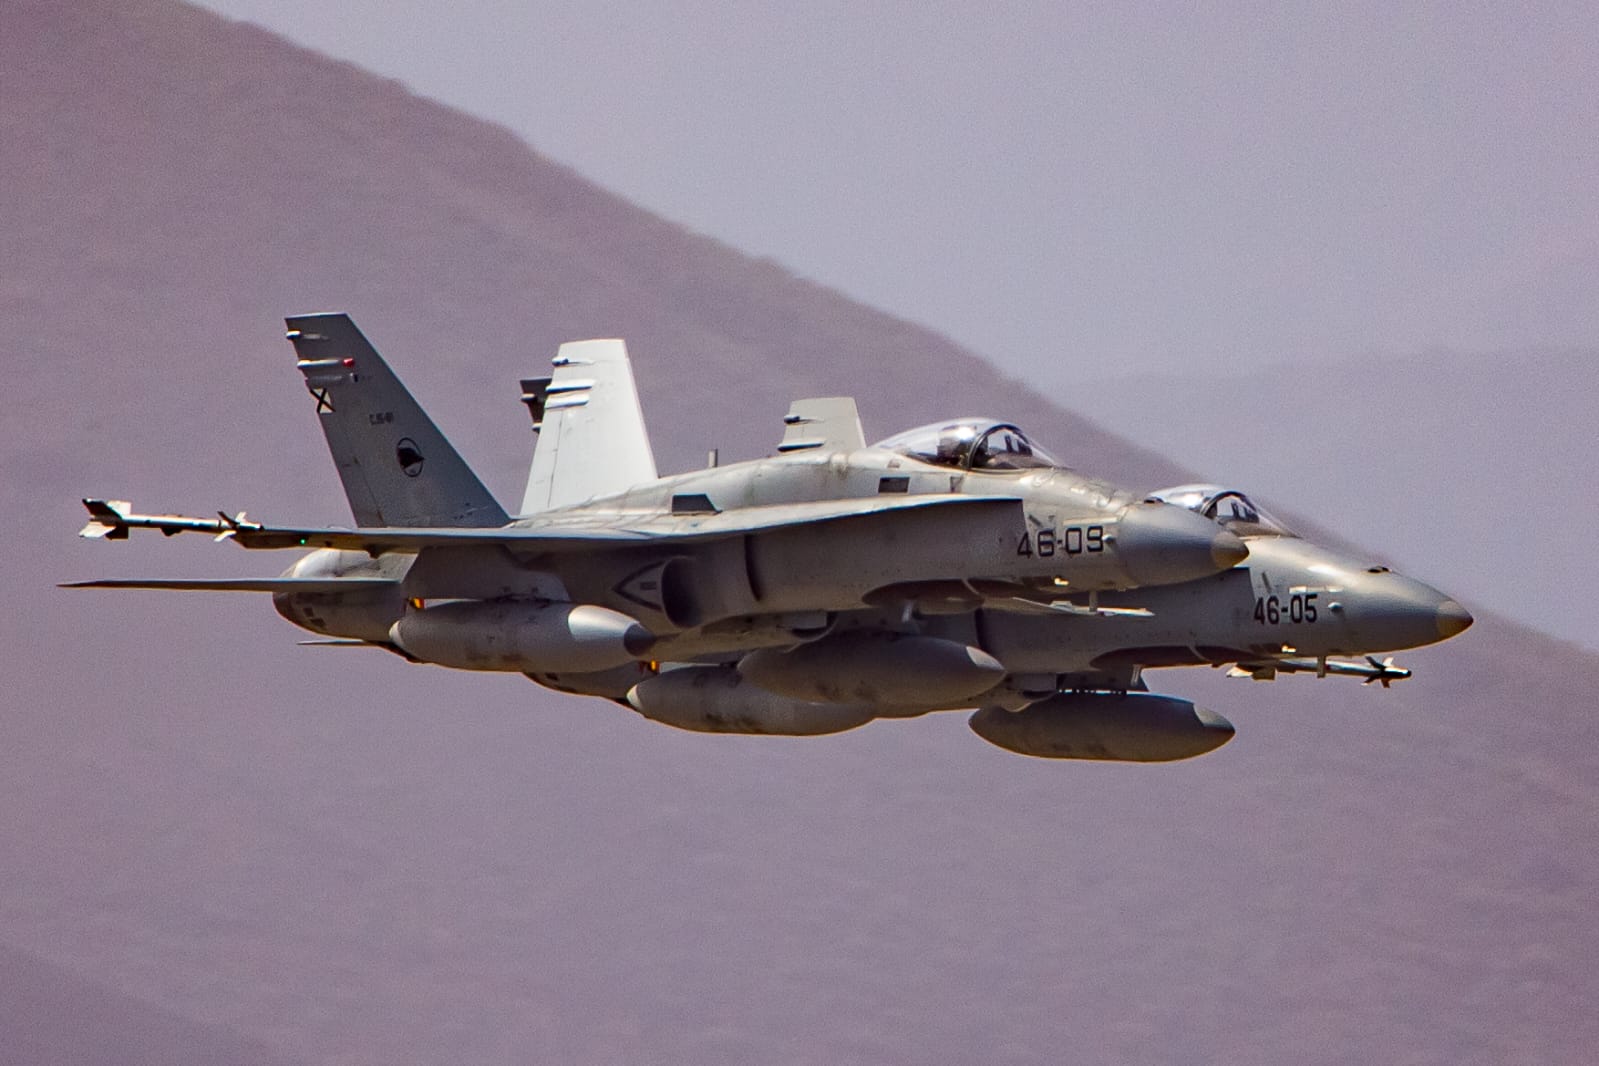 EF-18 of the 46th Wing